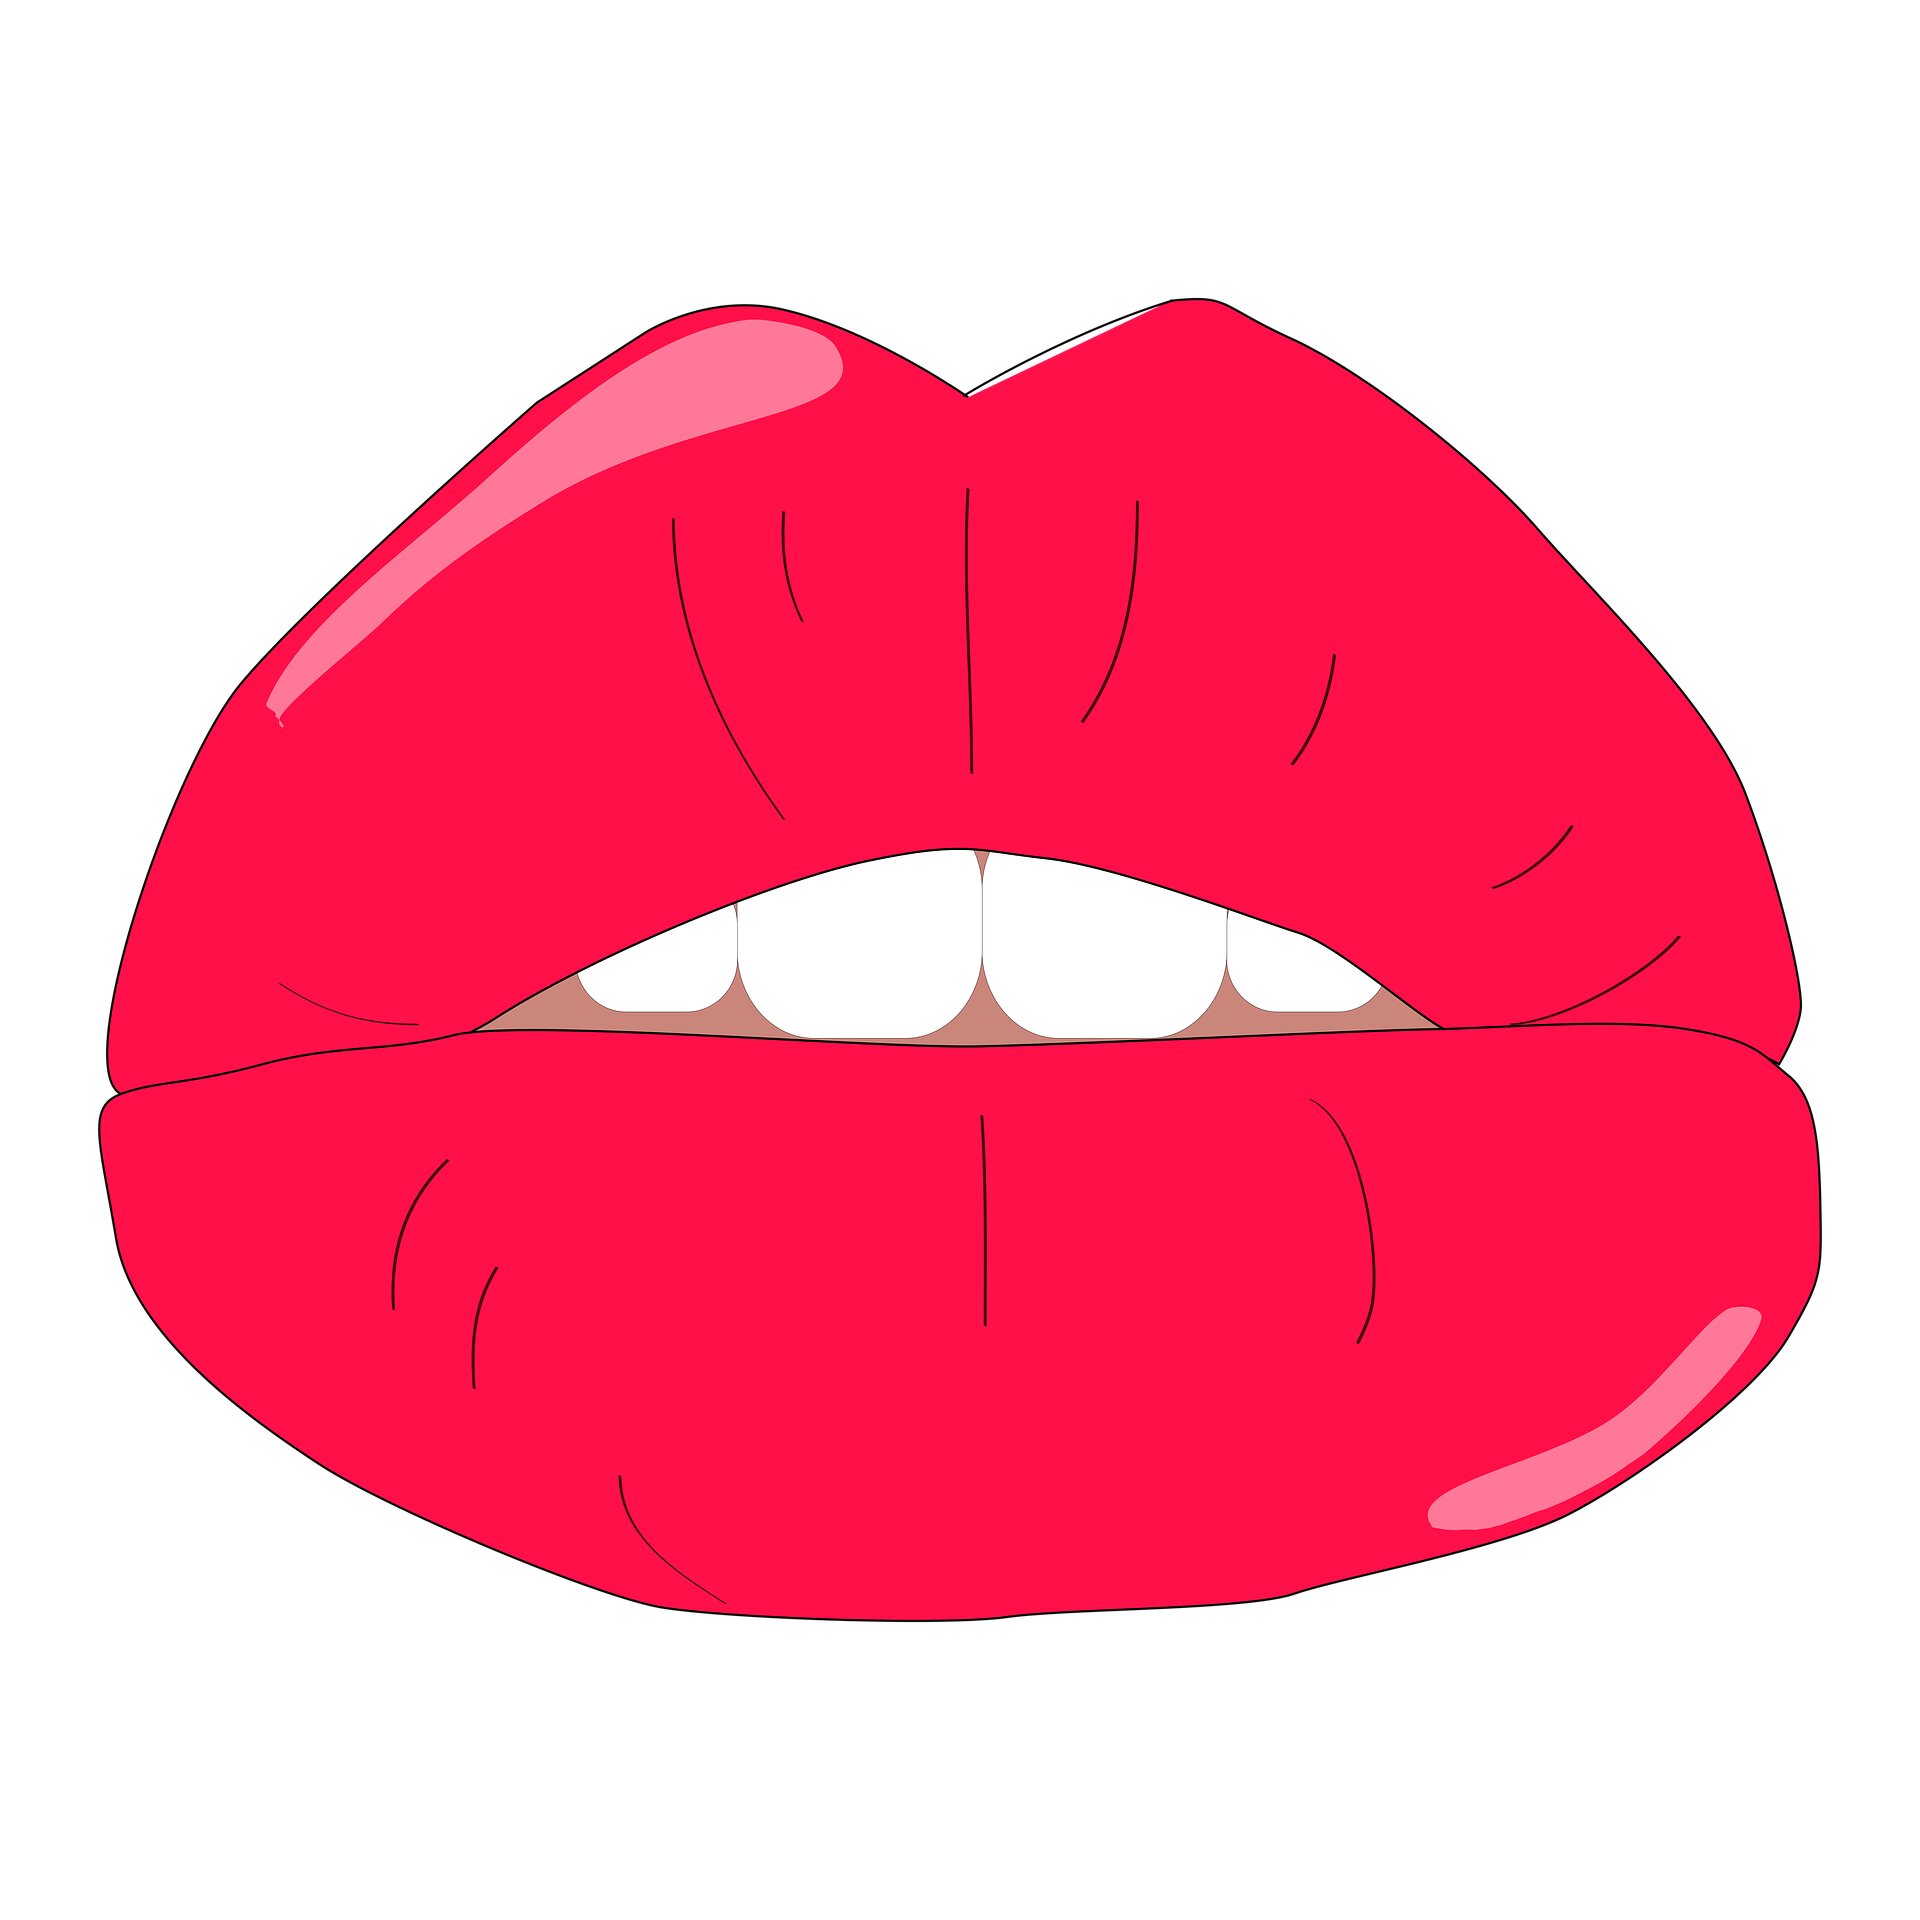 Can Forensic Investigations Benefit from Enhanced Speaker Recognition for Detecting Pouted Lips?